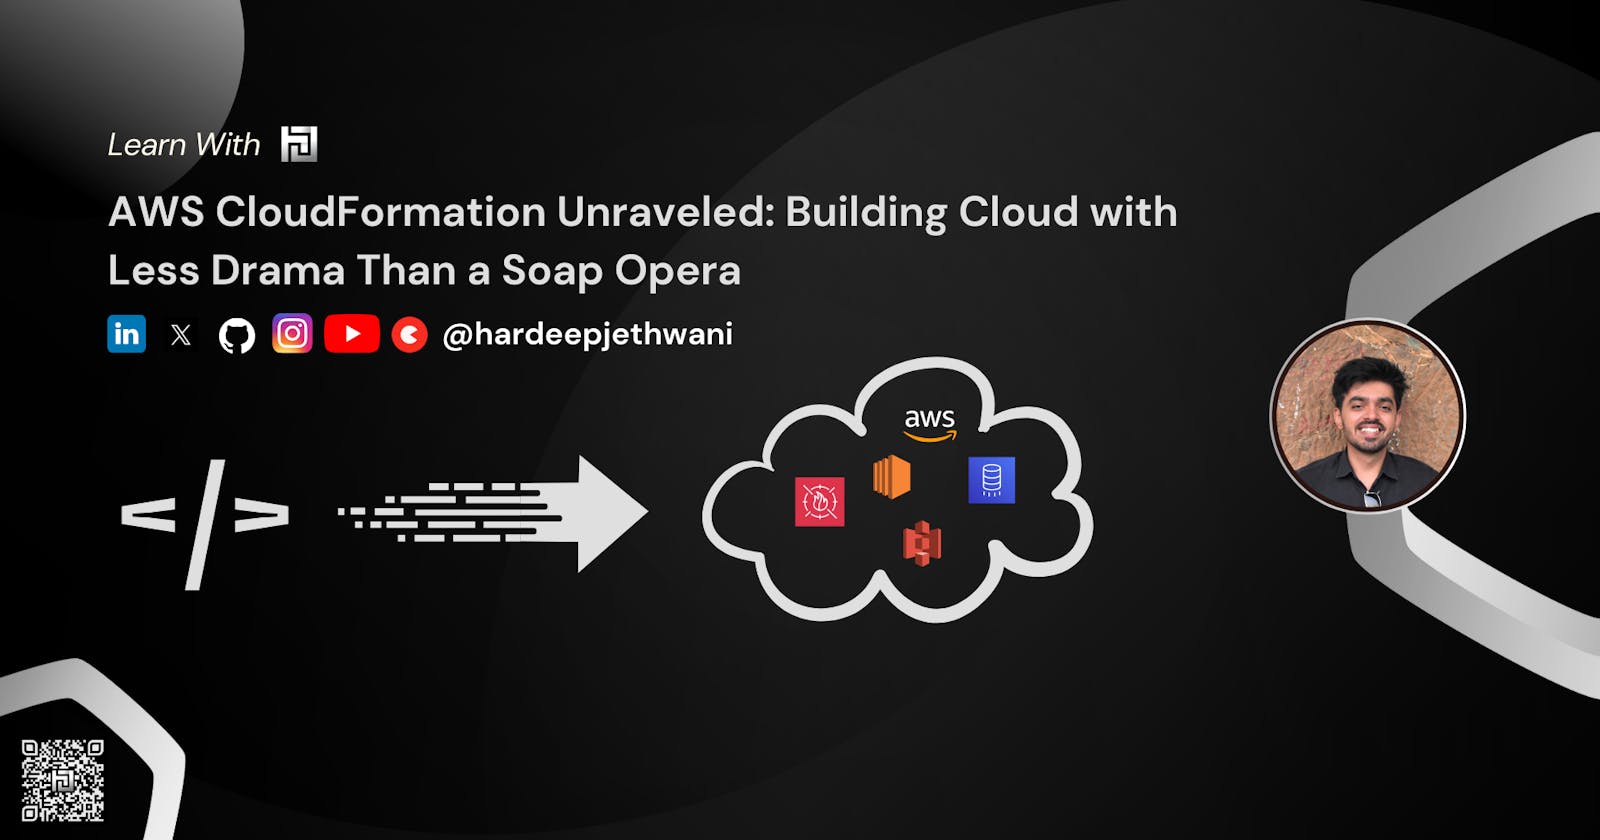 AWS CloudFormation Unraveled: Building Cloud with Less Drama Than a Soap Opera